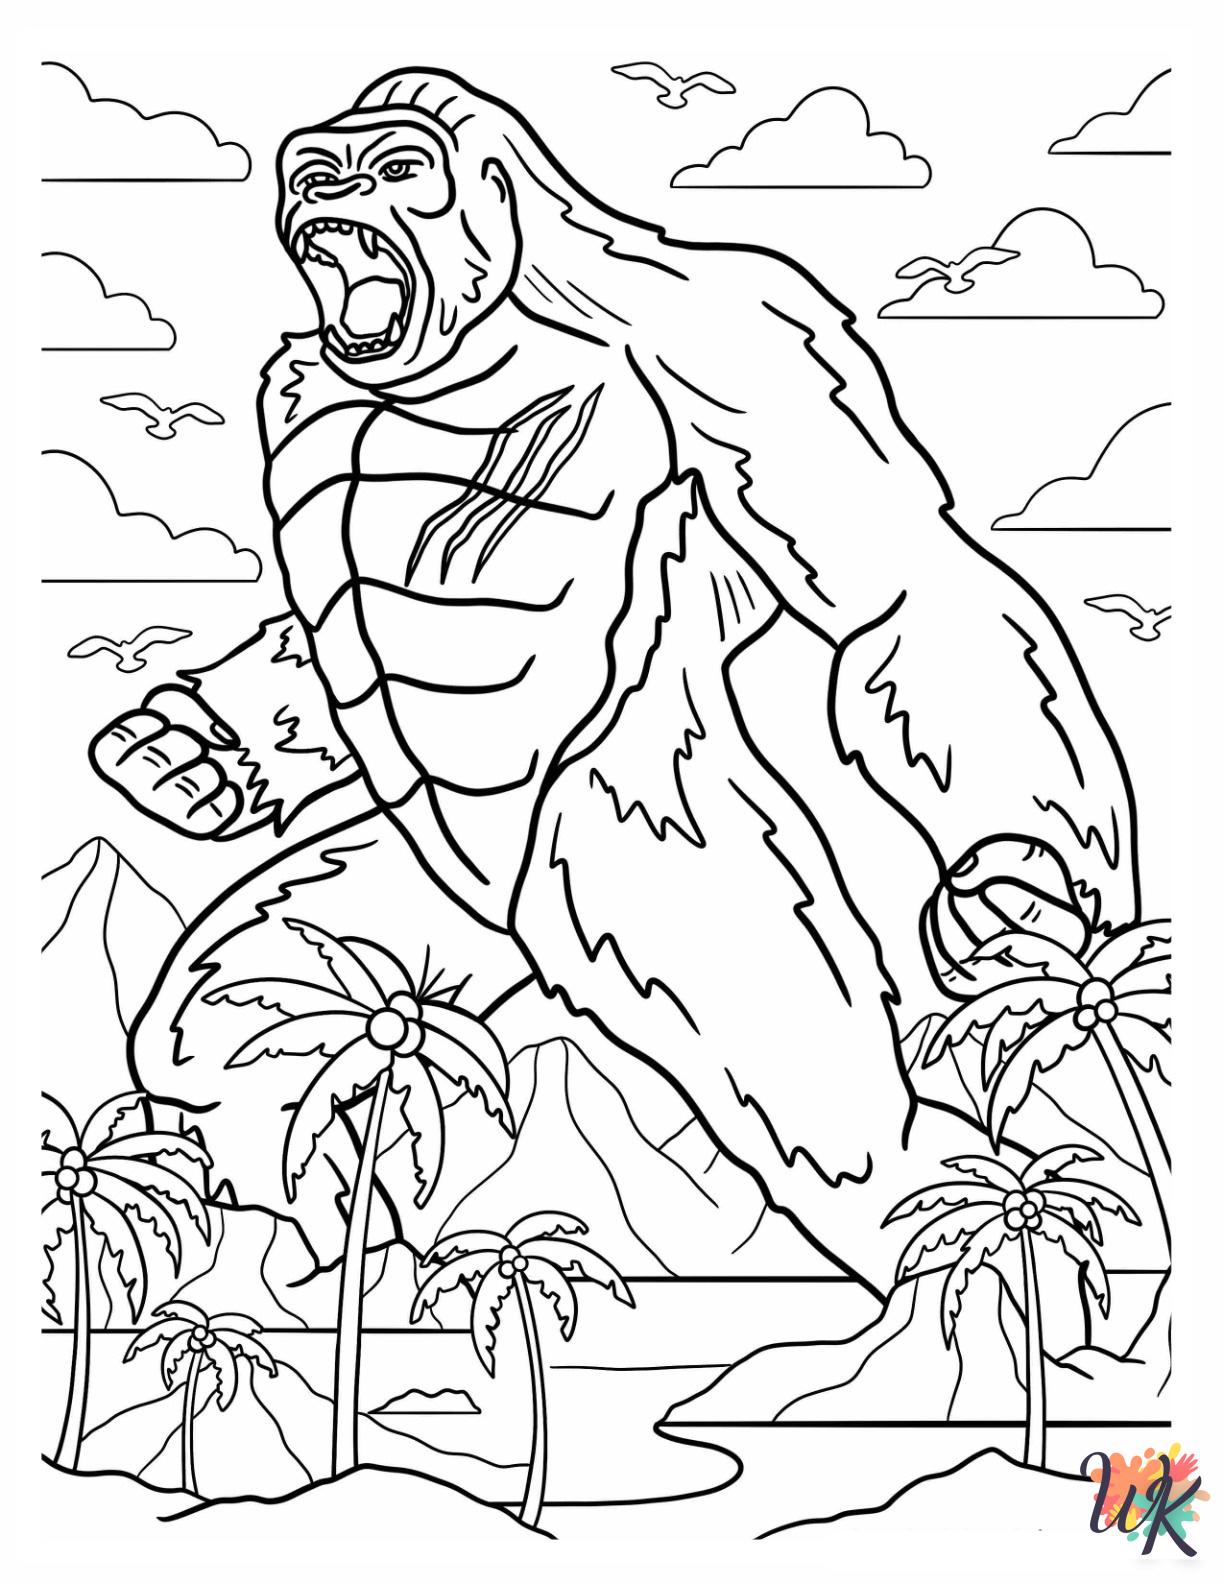 King Kong coloring pages pdf